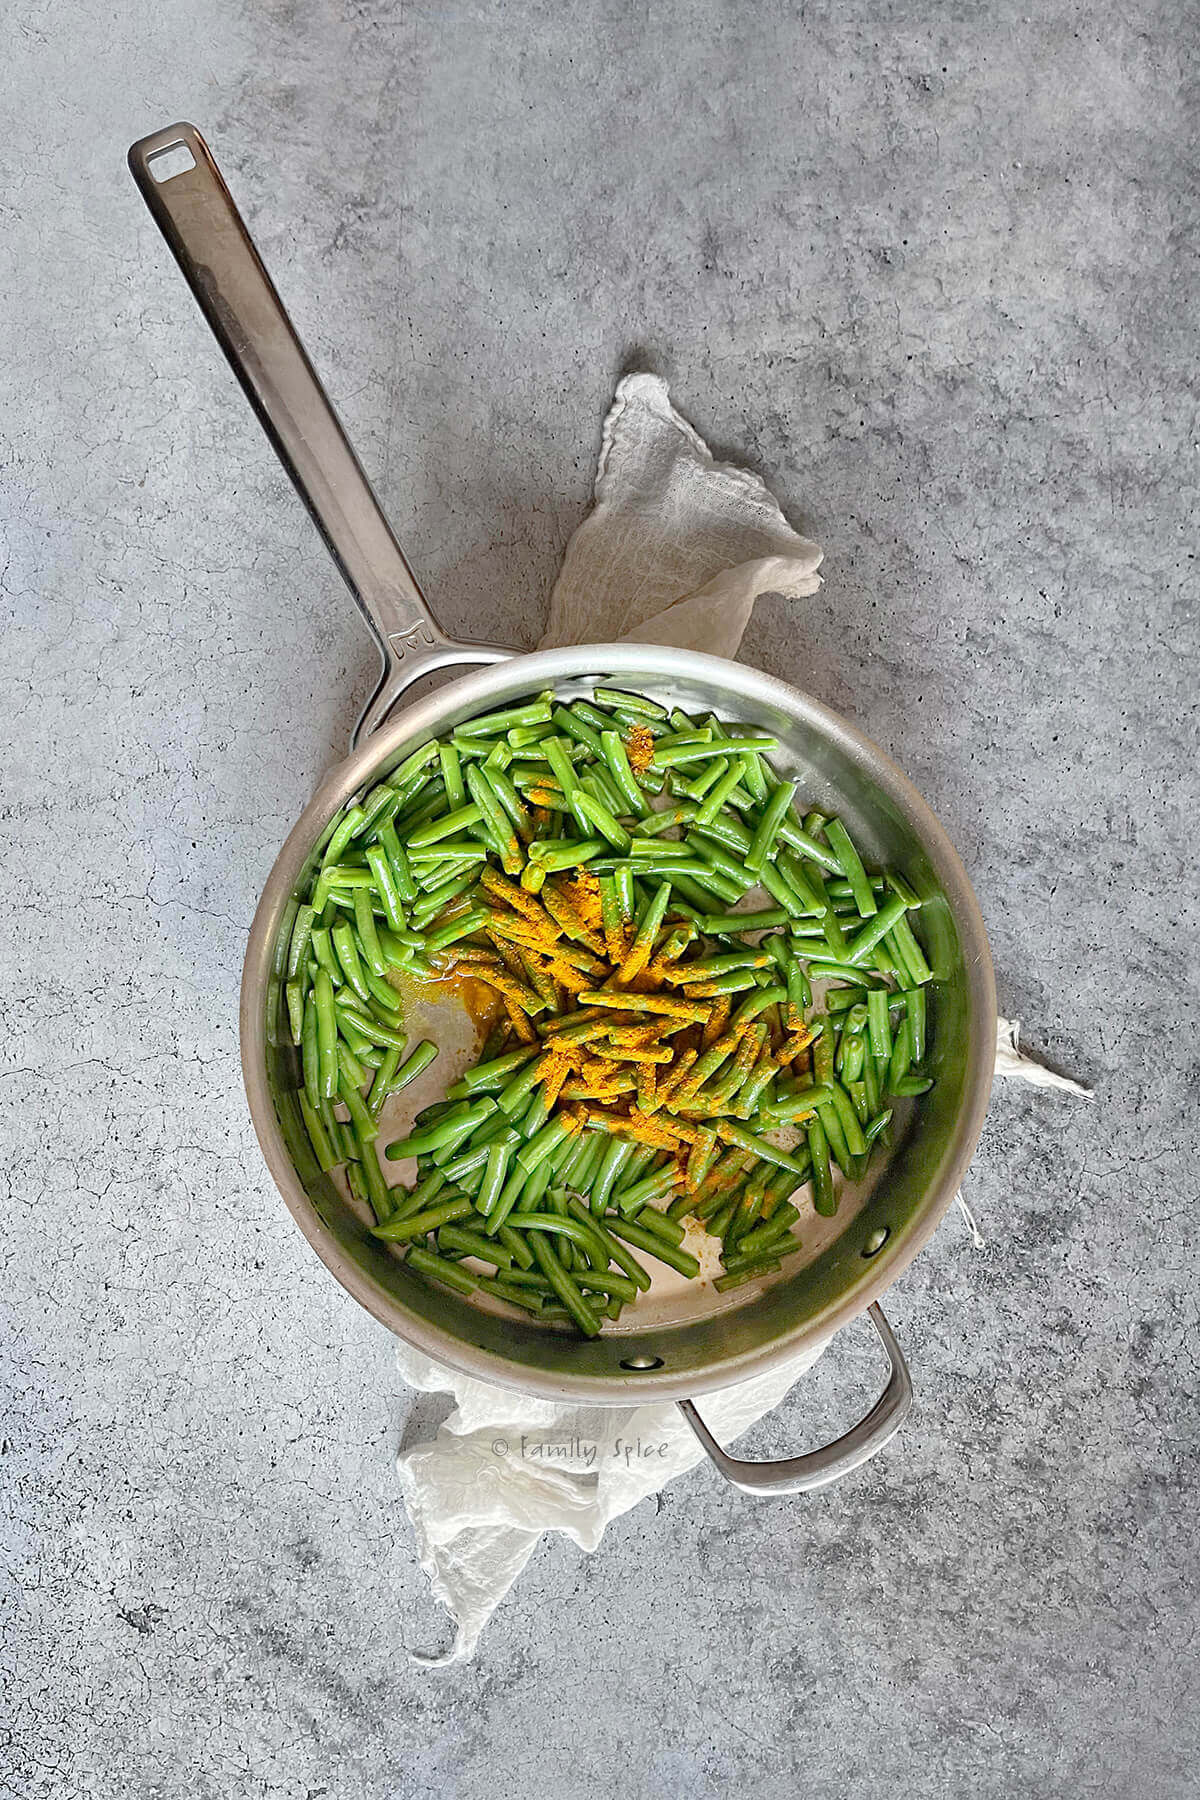 Top view of a stainless pan with cut green beans topped with turmeric in it